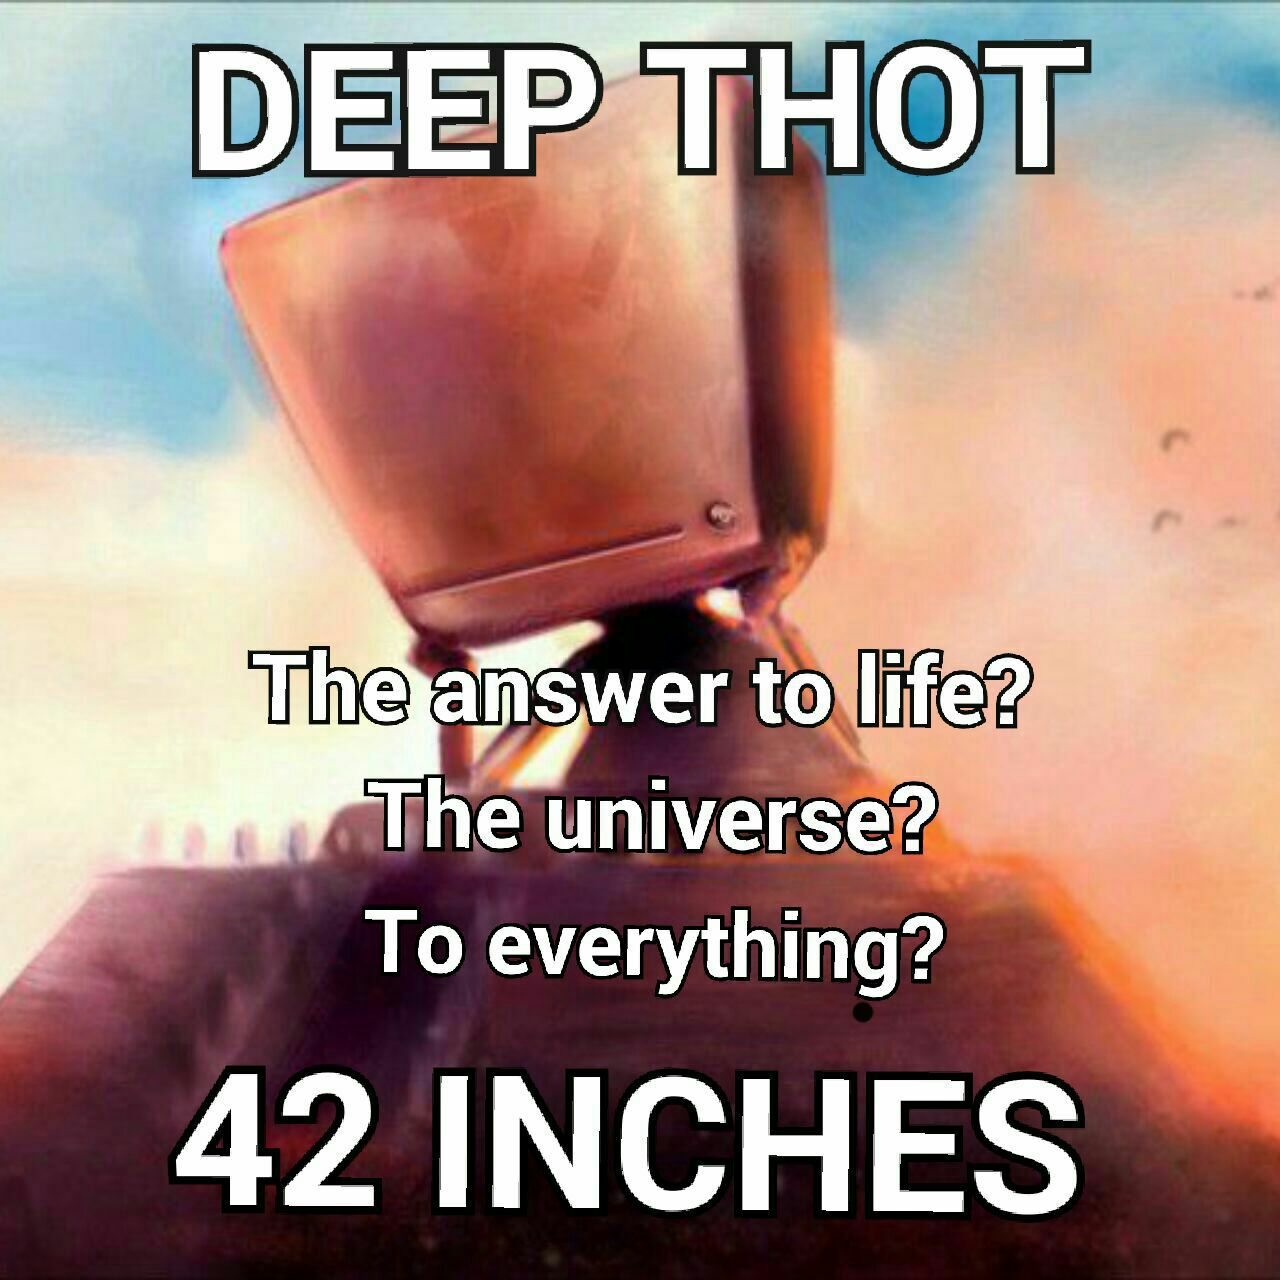 Zac QuillK [TeEm] on X: Can this be a new meme? #JokeoftheDay #hhgttg  #deepthoughts #funny #42 #deepthot #ThotsAndPrayers #thotlife #thot #Answer  #meaning #lifetheuniverseandeverything #butts  / X